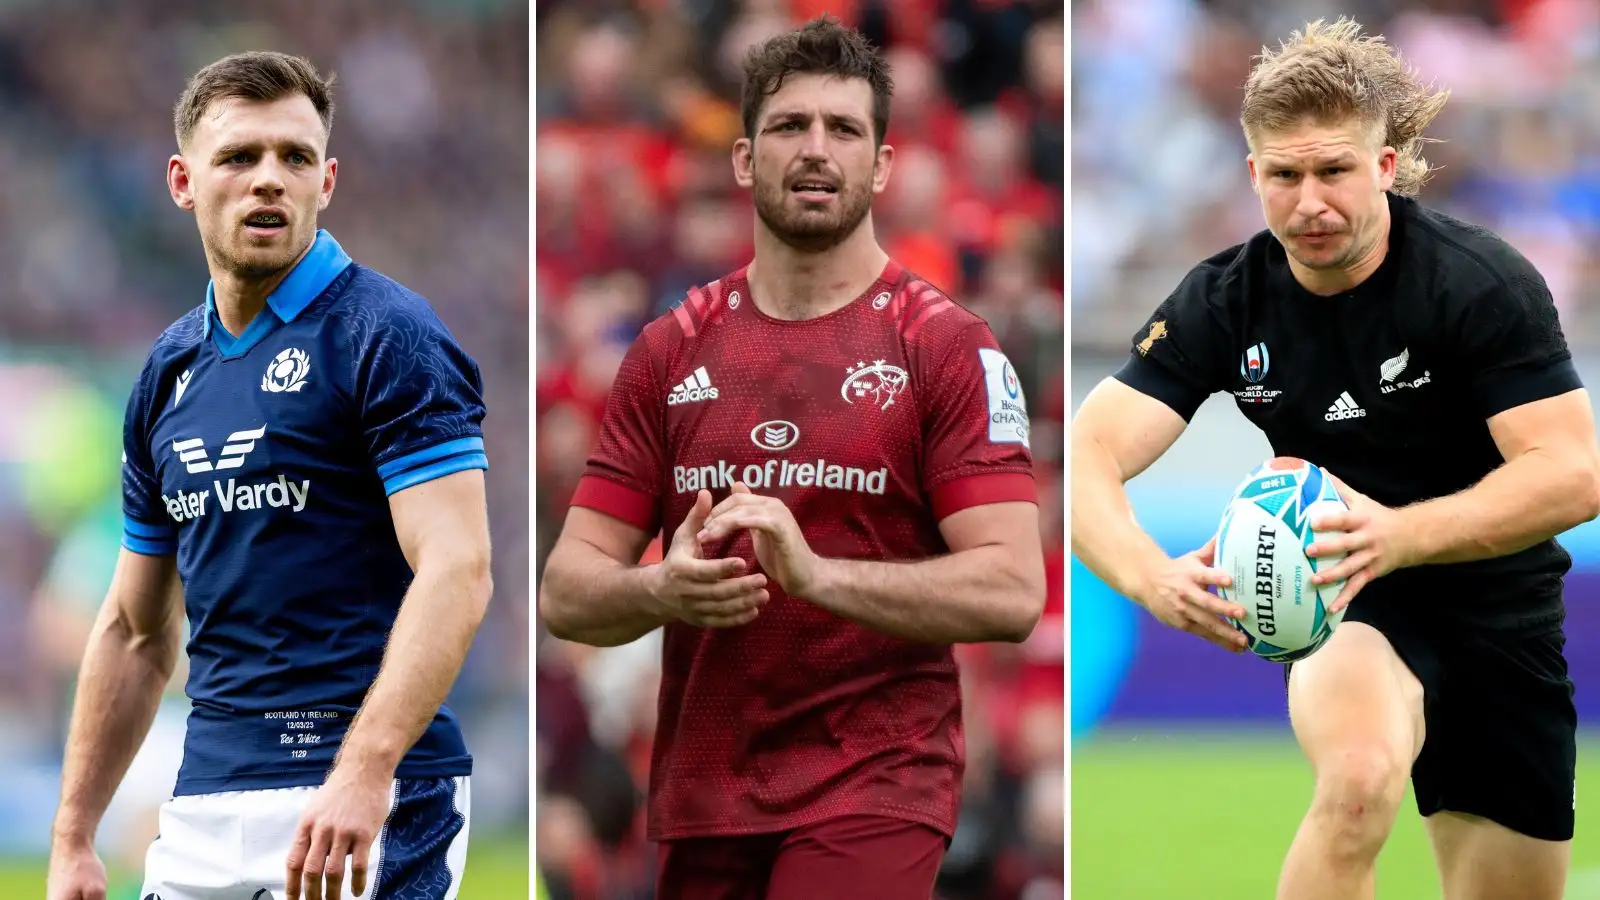 Planet Rugby recaps some of the biggest rugby transfer news and rumours, including Ben White, Jean Kleyn, Jack Goodhue and much more.